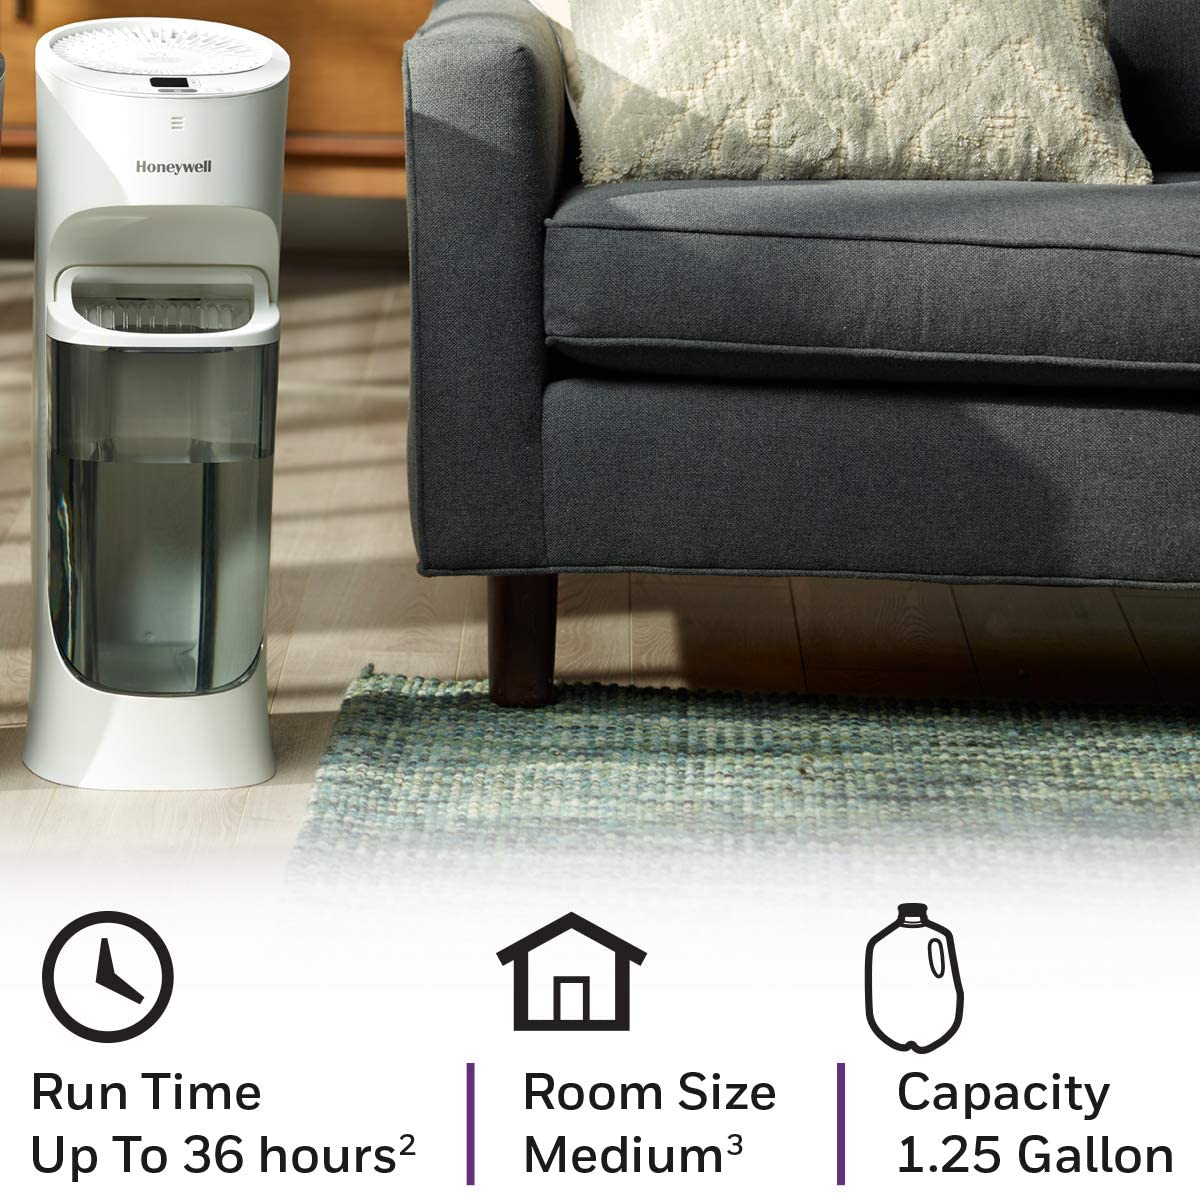 Honeywell HEV620W Humidifier Review